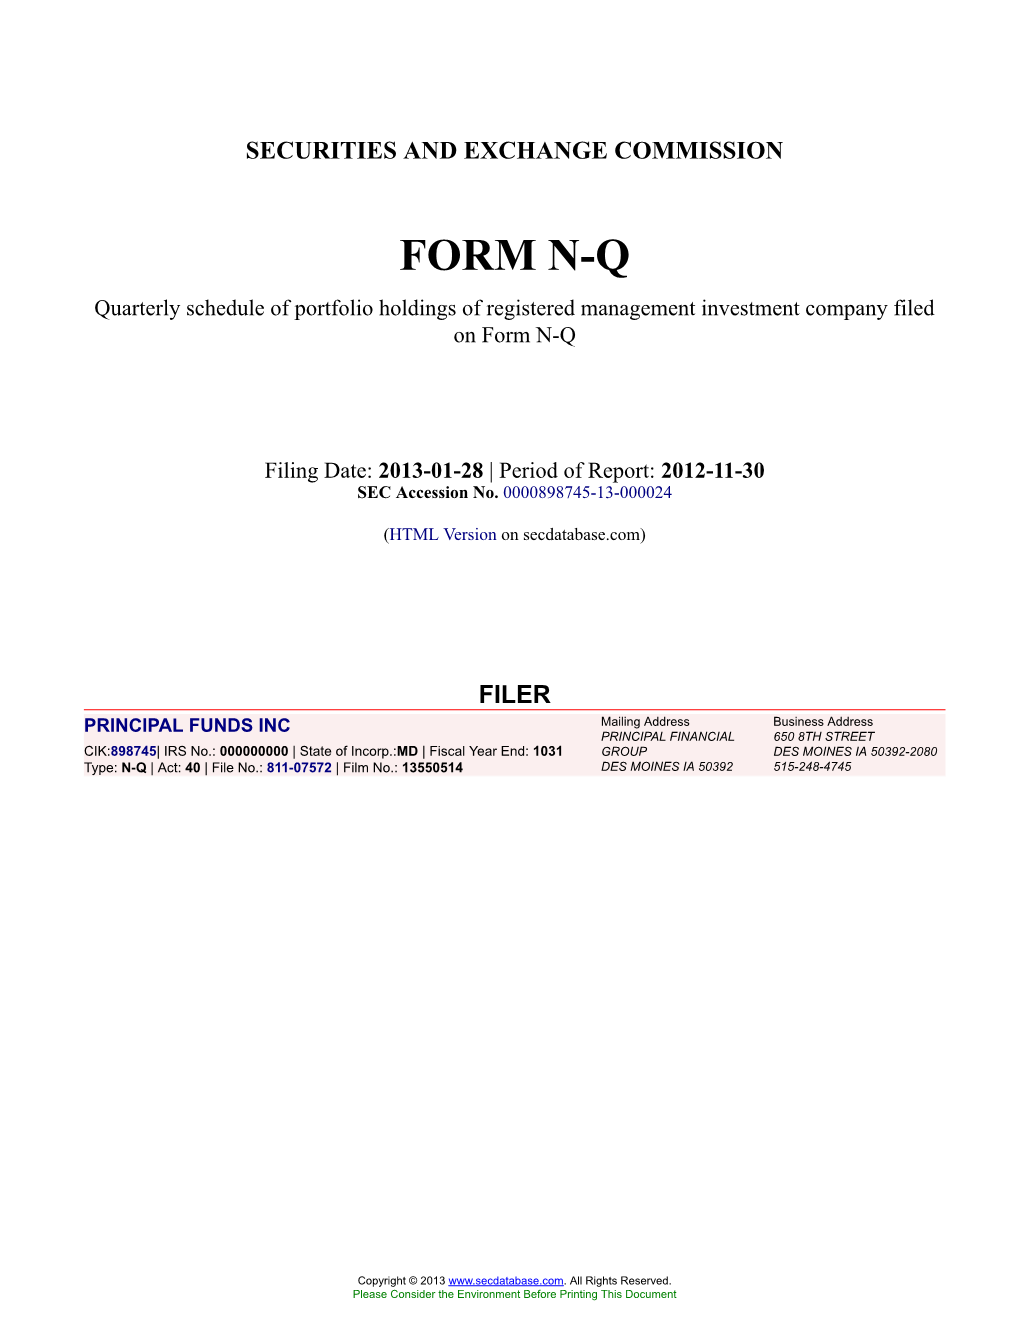 FUNDS INC Form NQ Filed 2013-01-28